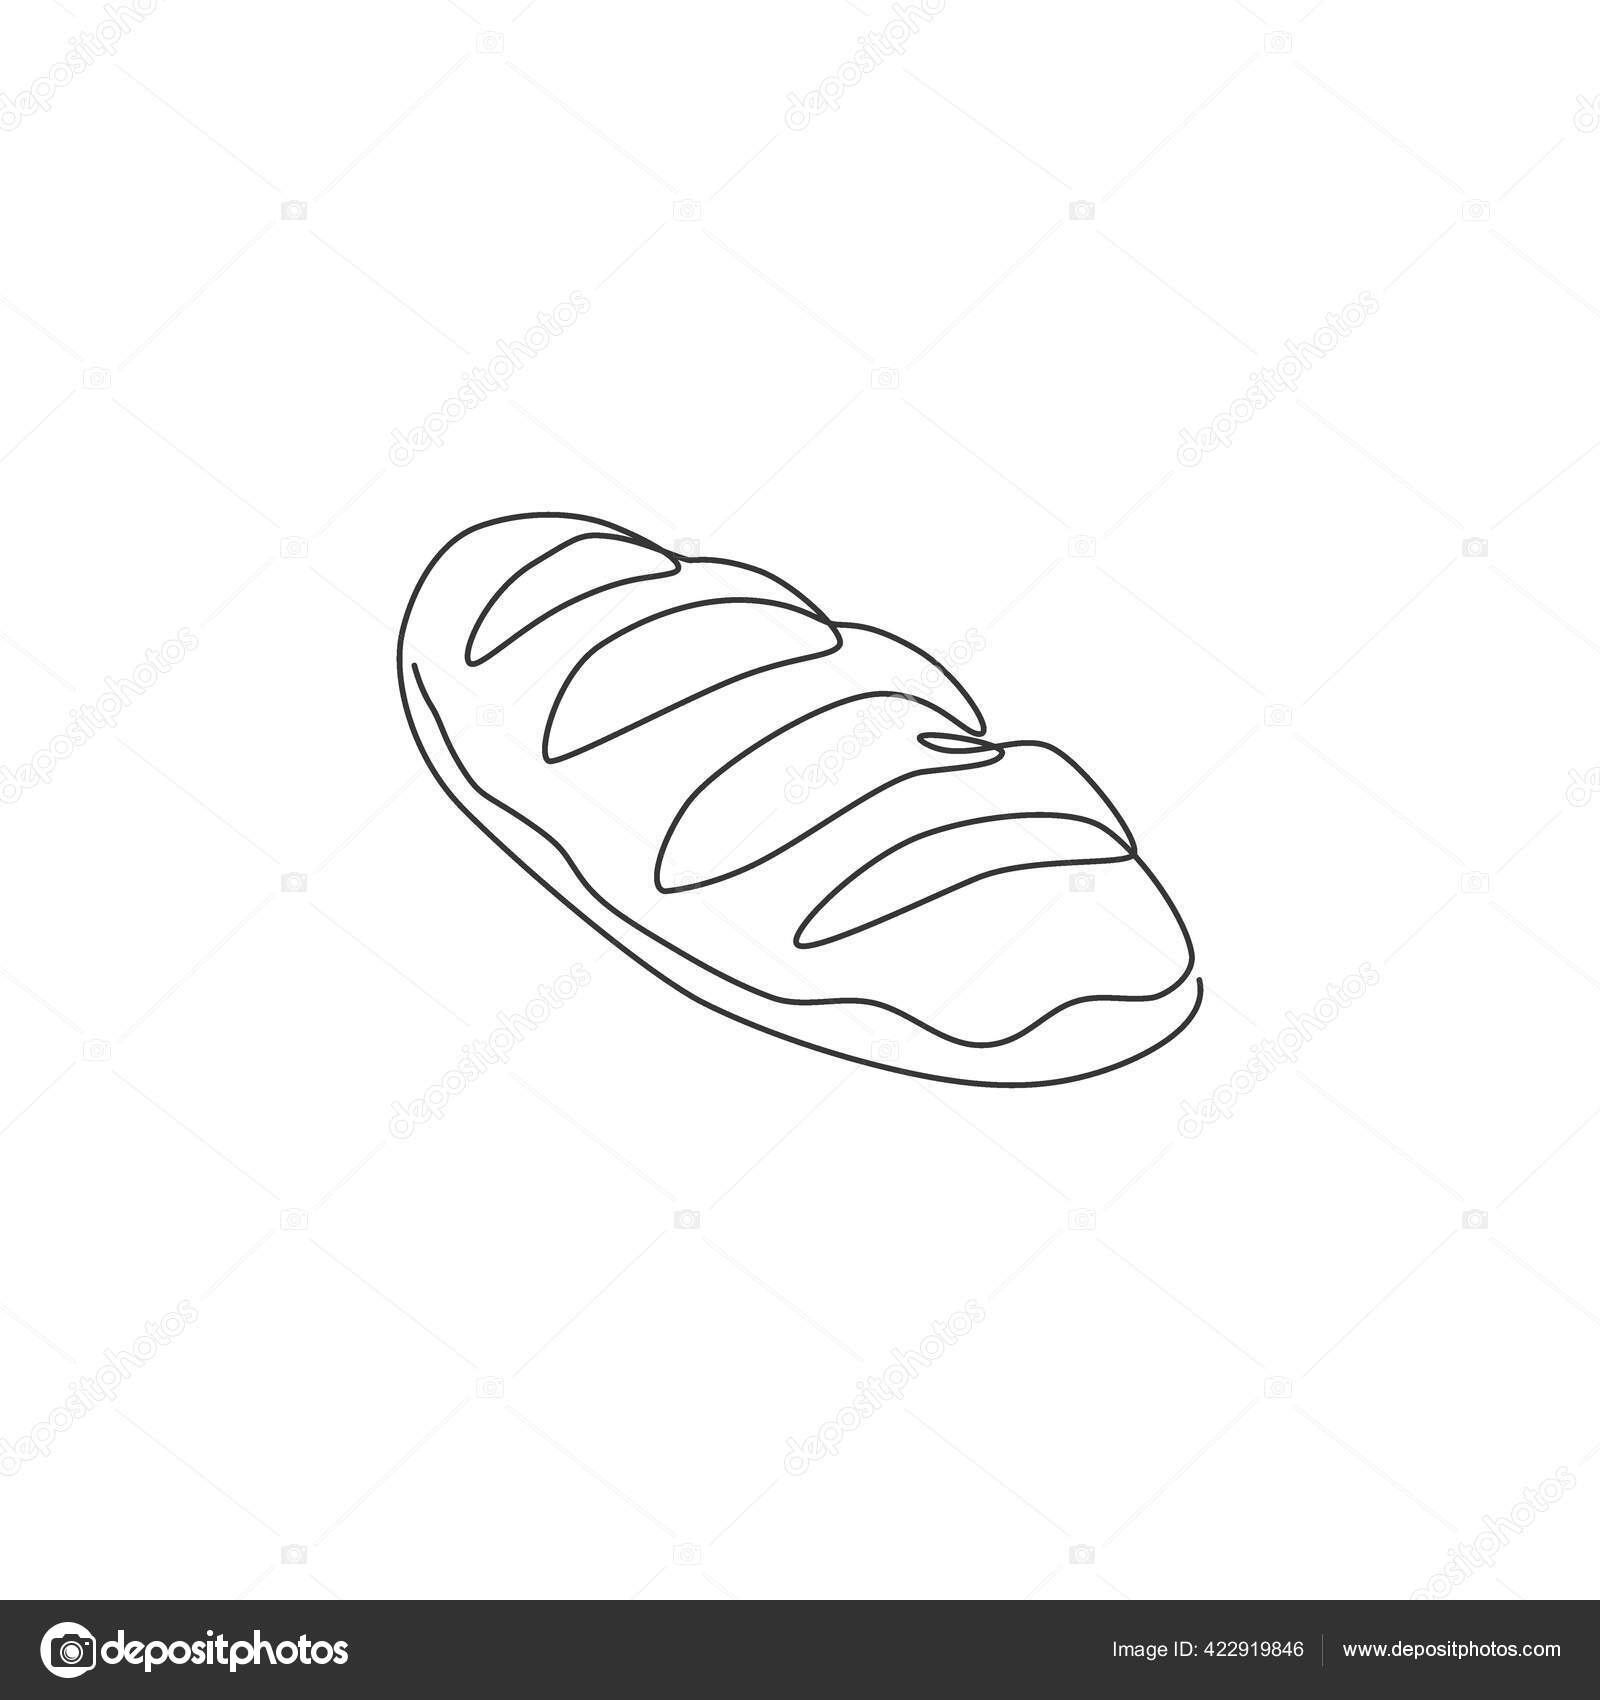 how to draw bread step by step | Easy doodles drawings, Cute easy drawings,  Drawings